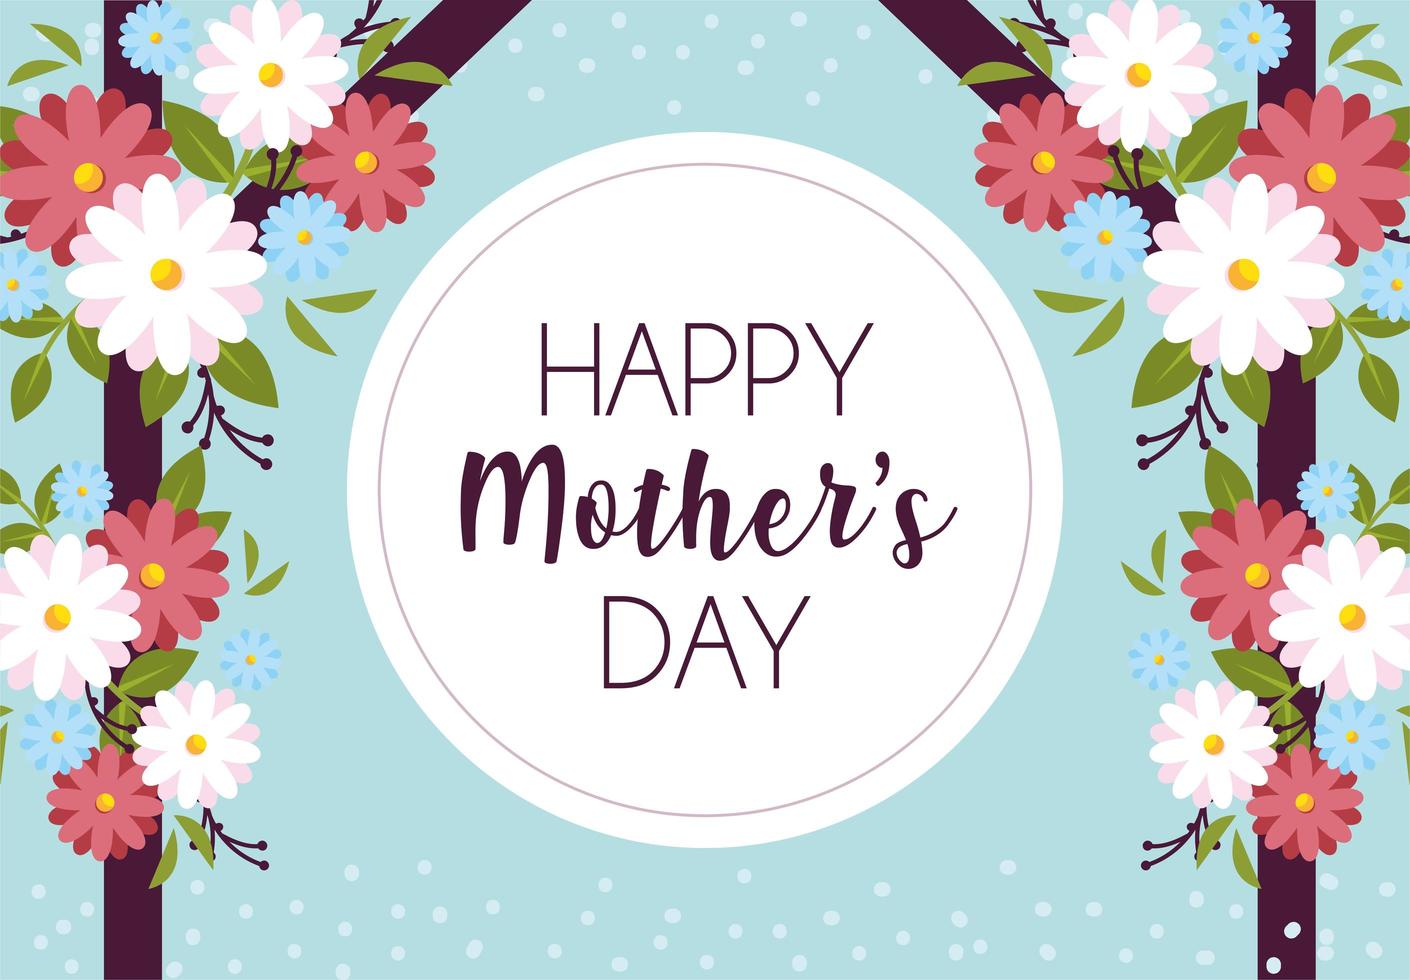 label happy mothers day and flower frame vector